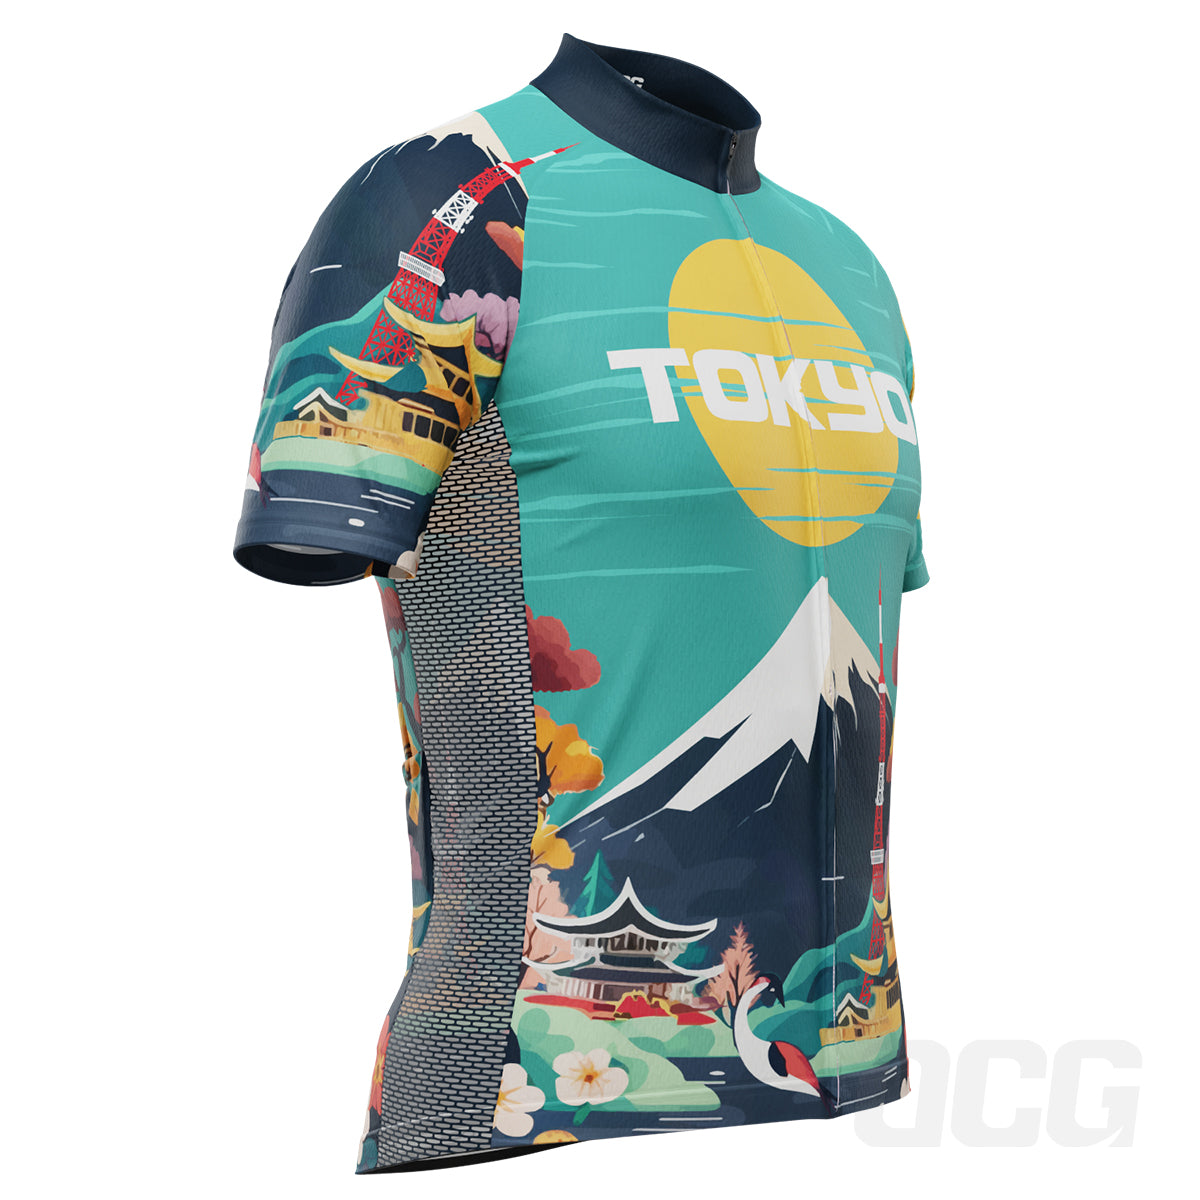 Men's Around The World - Tokyo Short Sleeve Cycling Jersey